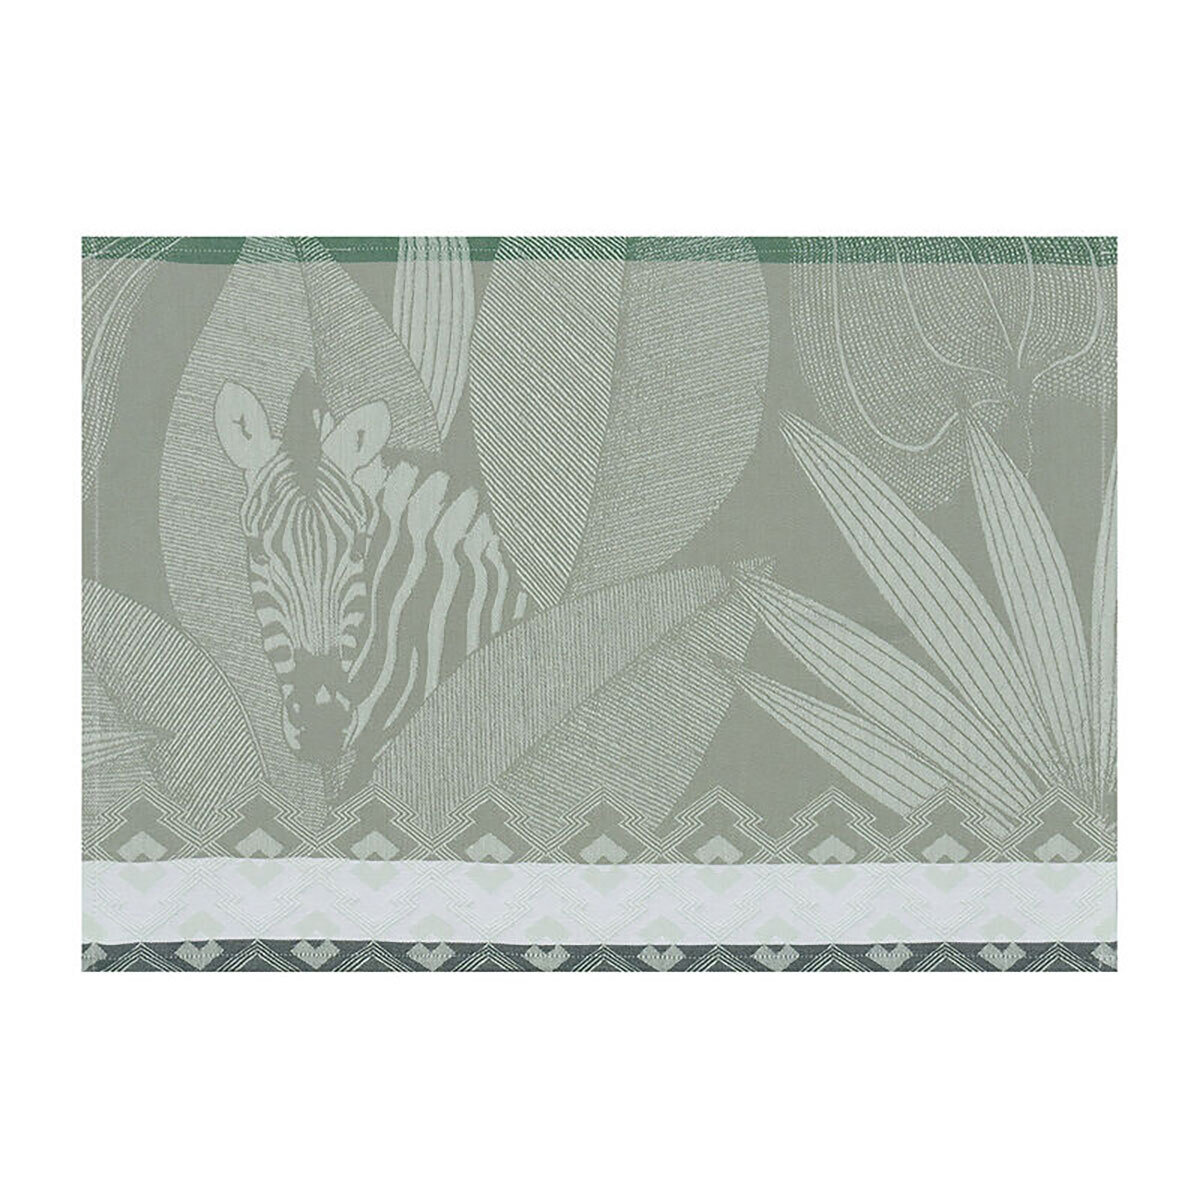 Le Jacquard Francais Nature Sauvage Green Placemat 20 x 14 Inch 27453 Set of 4